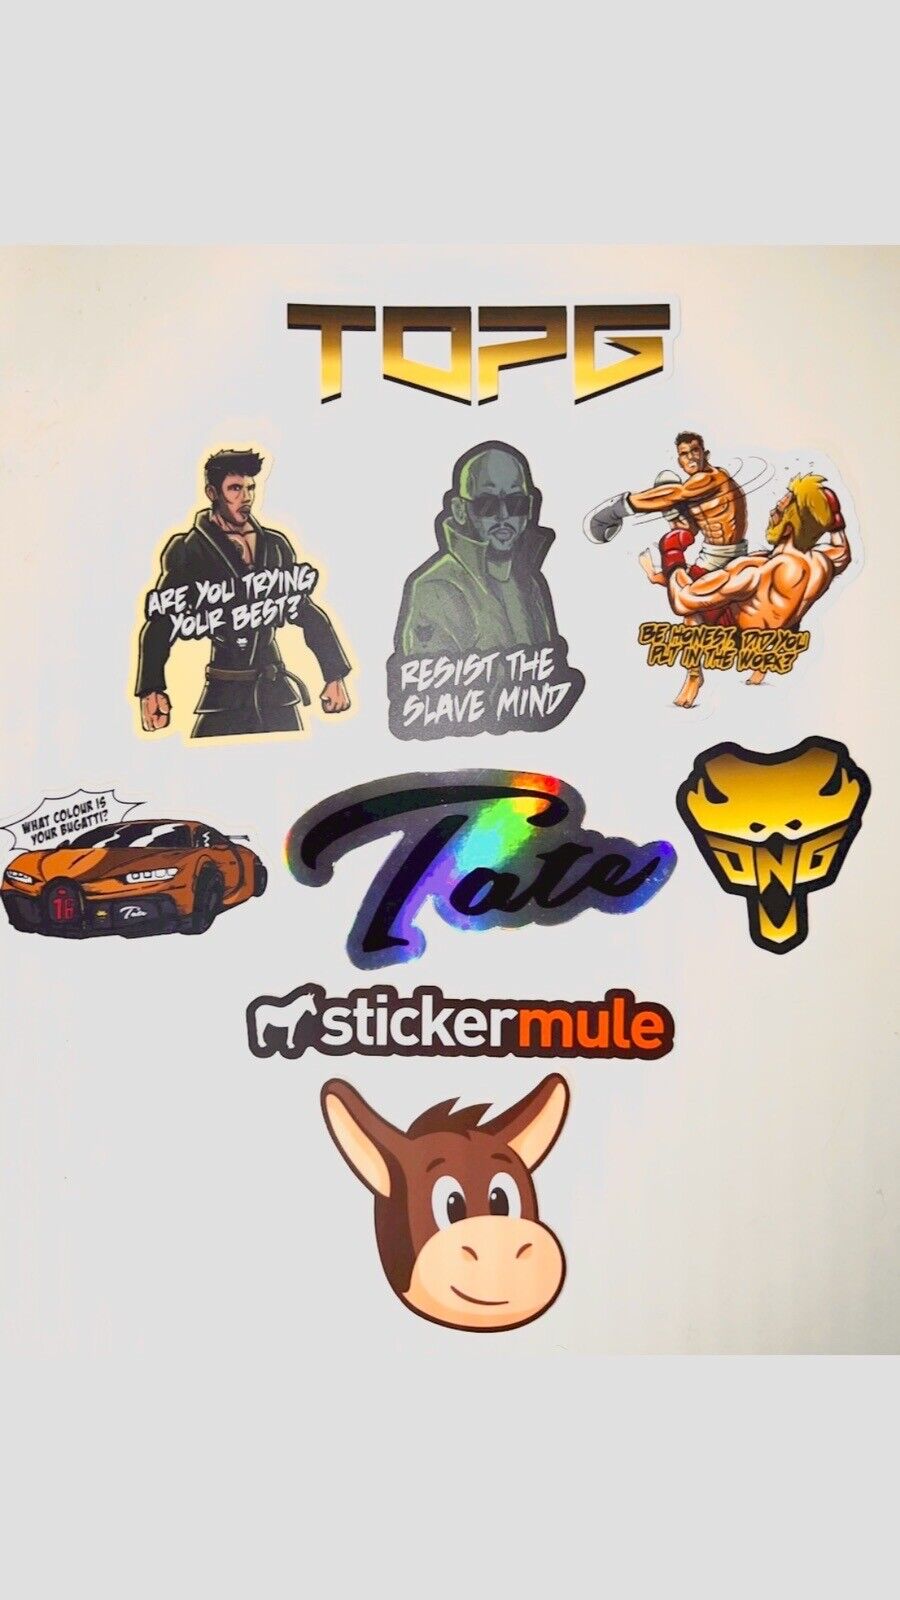 ANDREW TATE LIMITED EDITION STICKERS MADE BY TOPG HIMSELF